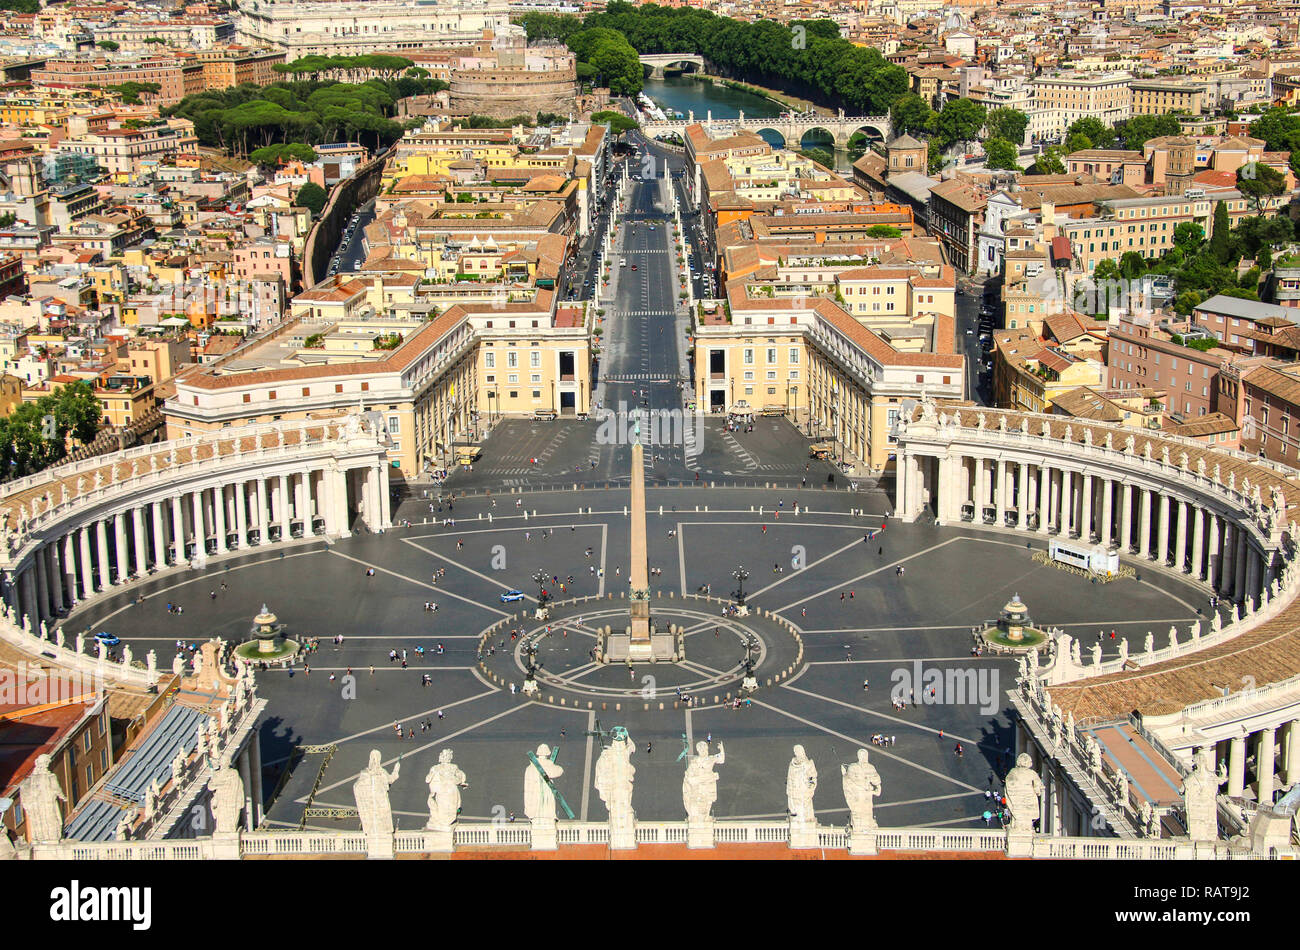 View from St. Peter's Basilica.St. Peter's Square, Piazza San Pietro in Vatican City. Italy. Stock Photo